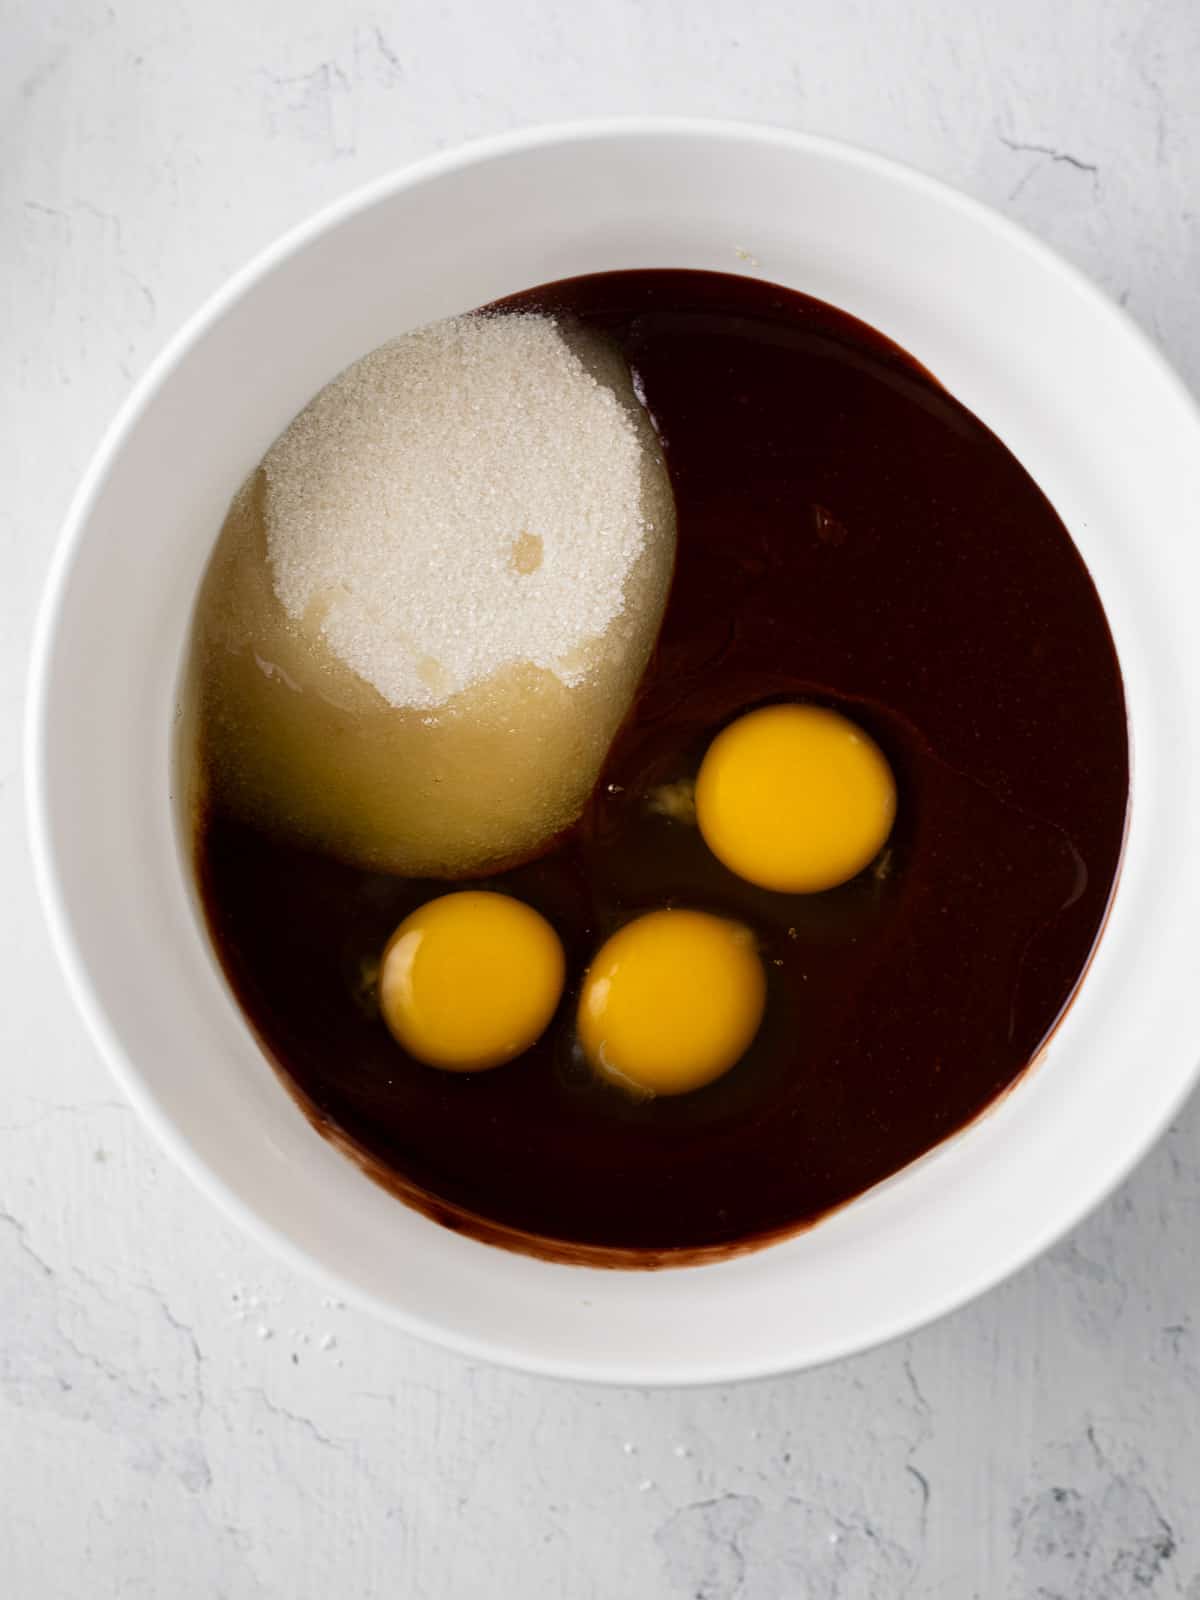 sugar and 3 eggs in a white bowl with melted chocolate.